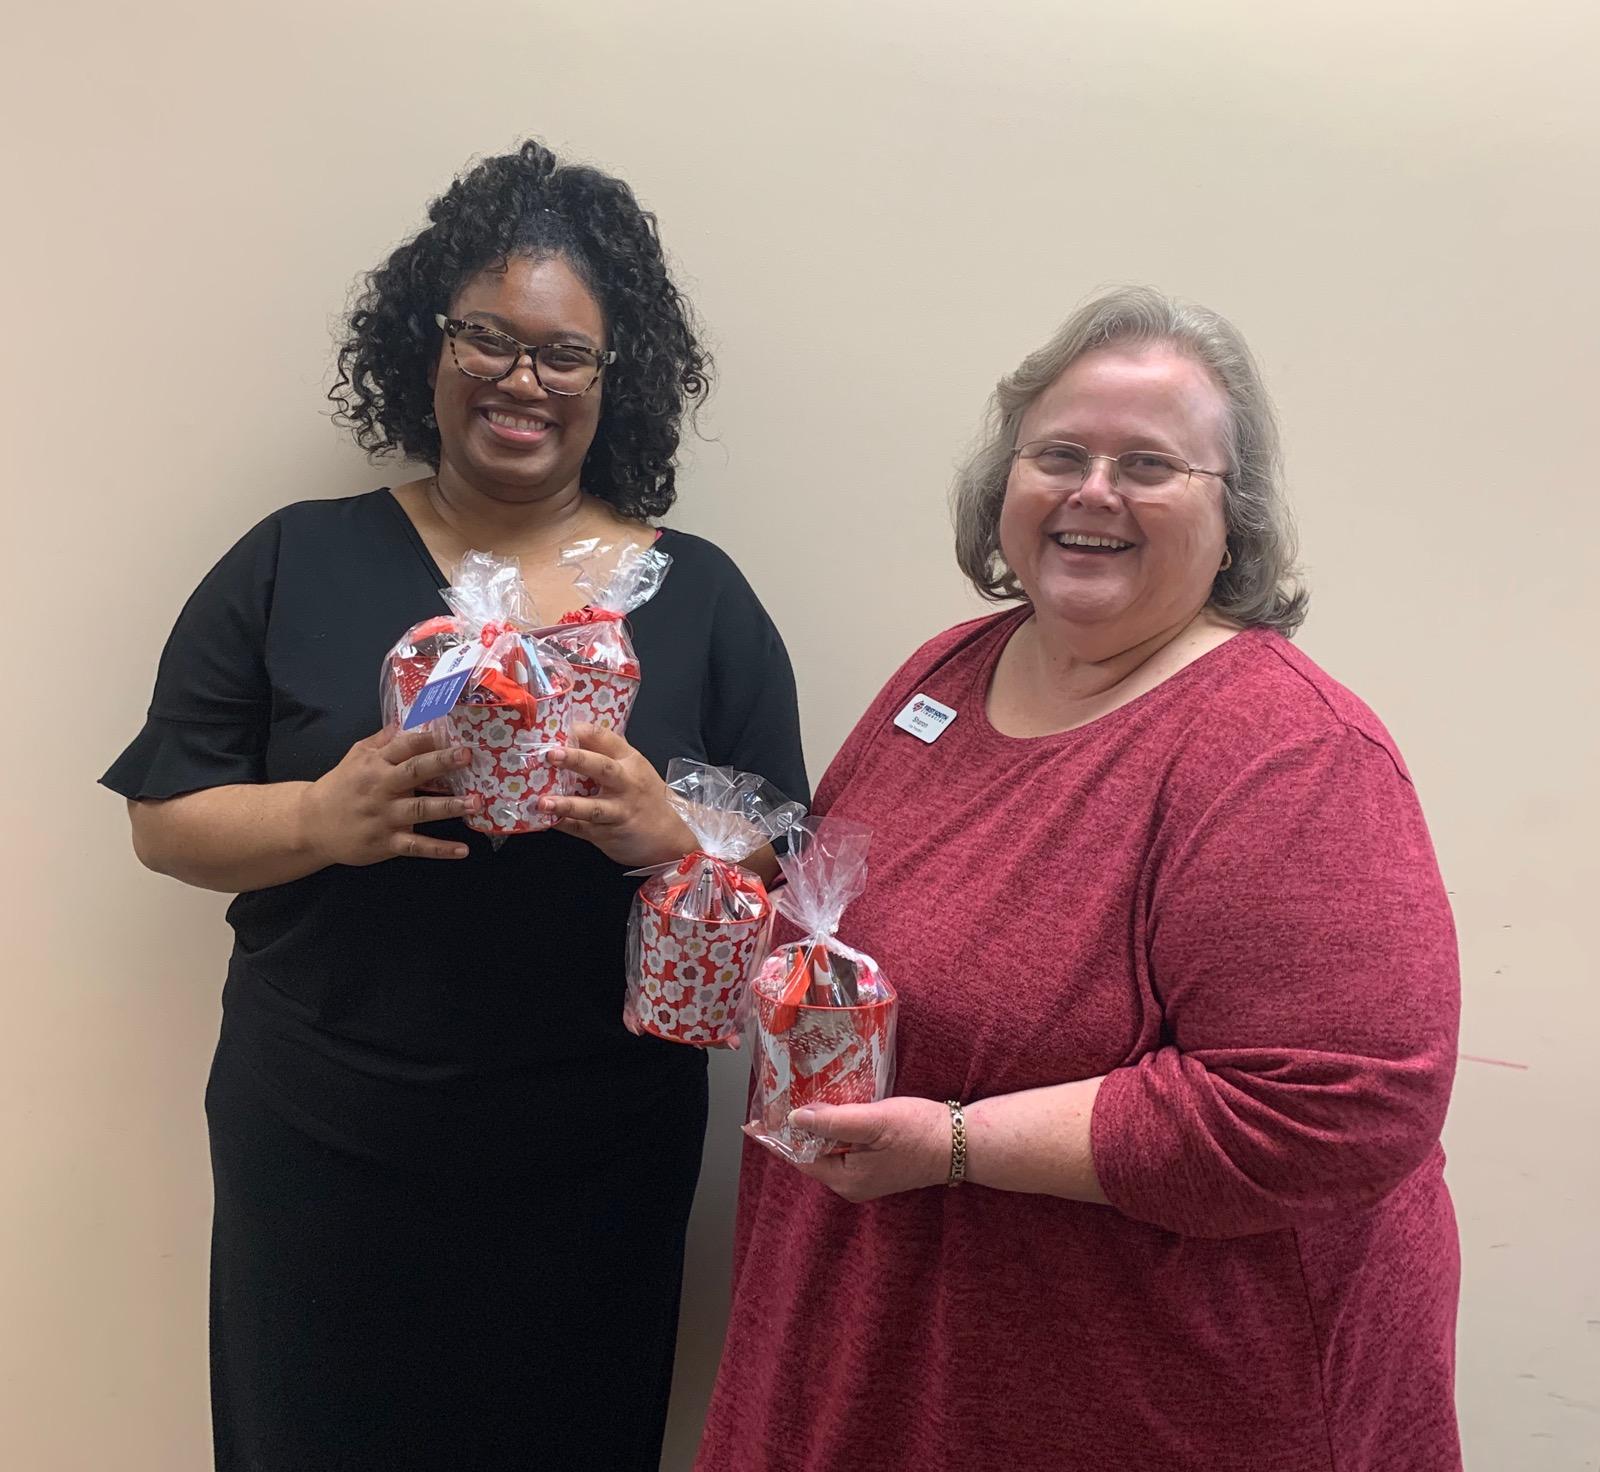 Kendra Watson and Sharon Davidson shared the love with Valentine treats for our partner companies in Dyersburg last week!